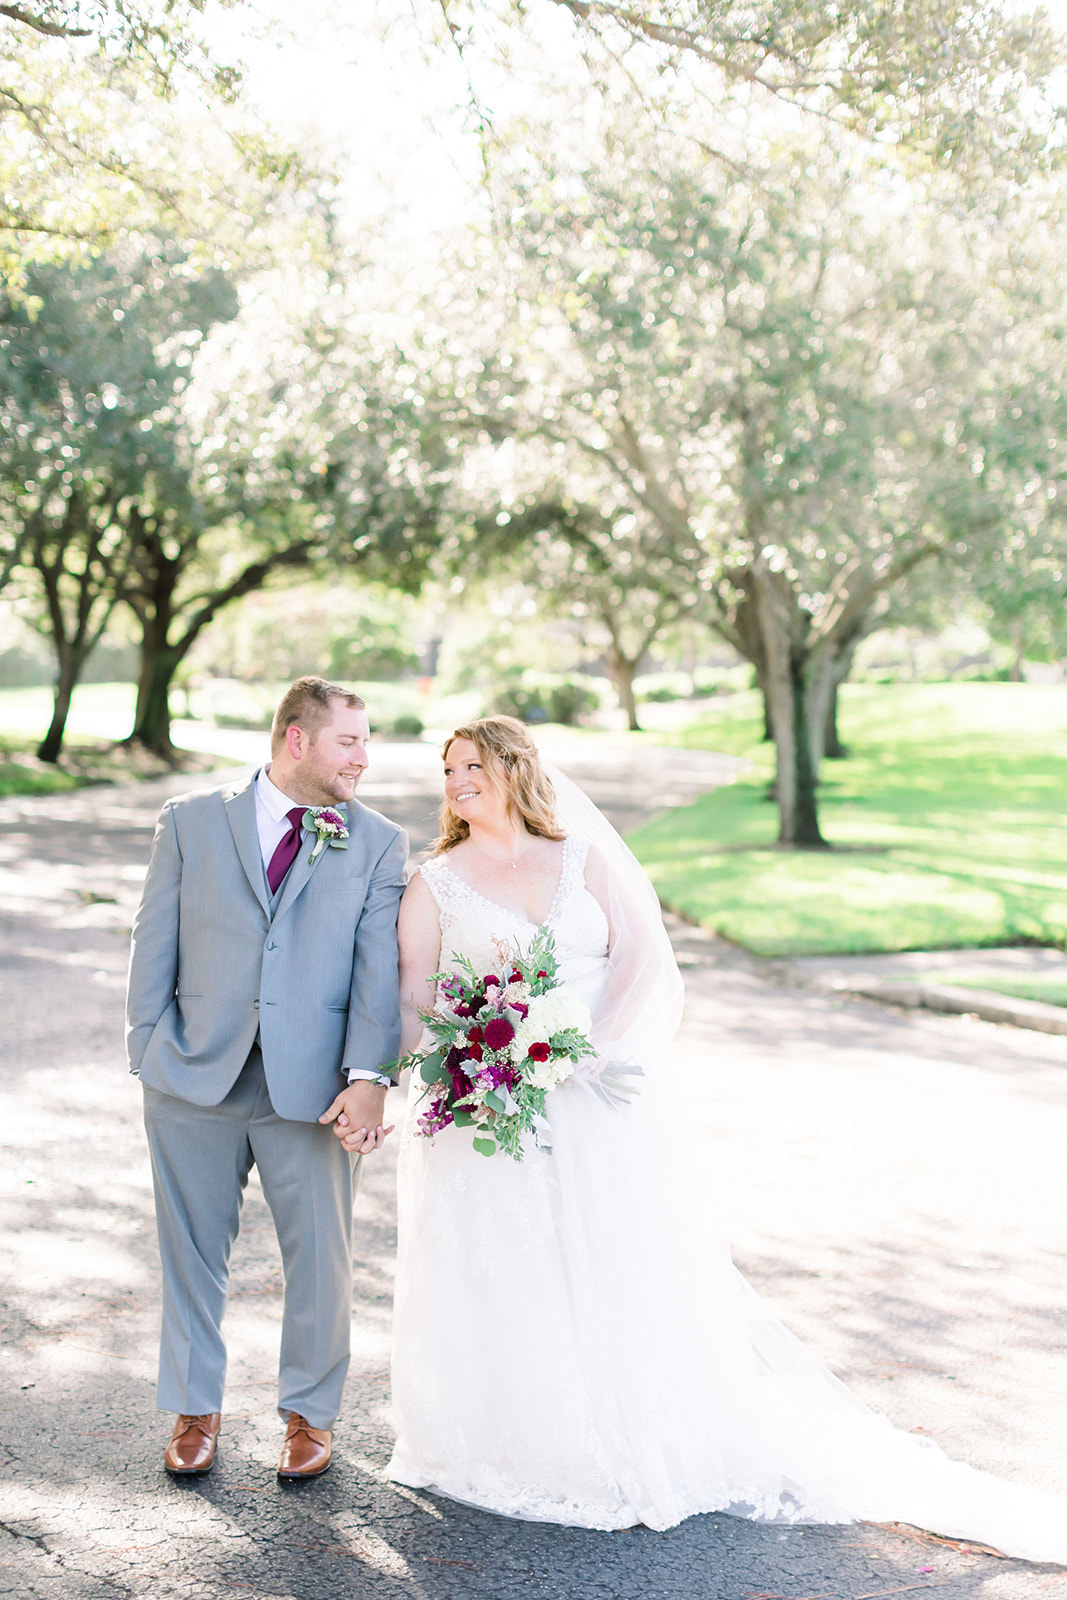 Rustic Bride in V Neckline Lace A-Line Wedding Dress Holding Organic Greenery Pink, Purple, White Floral Bouquet, Groom in Gray Suit with Maroon Tie Wedding Portrait | Tampa Bay Wedding Photographer Shauna and Jordon Photography | Largo Wedding Venue The Bayou Club